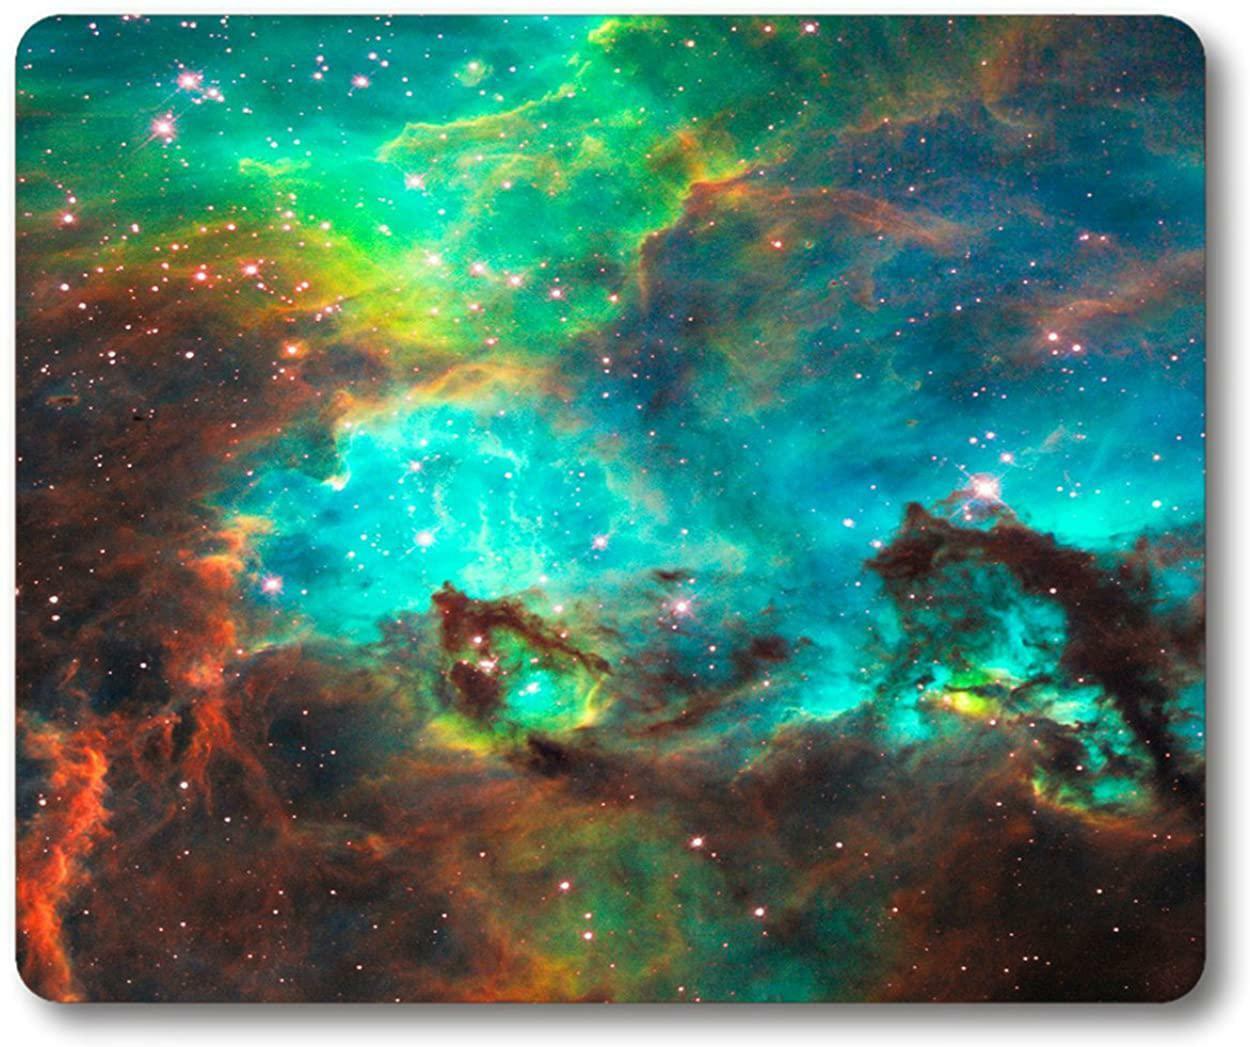 Smooffly Mouse Pad Galaxy Customized Rectangle Non-Slip Rubber Mousepad Gaming M